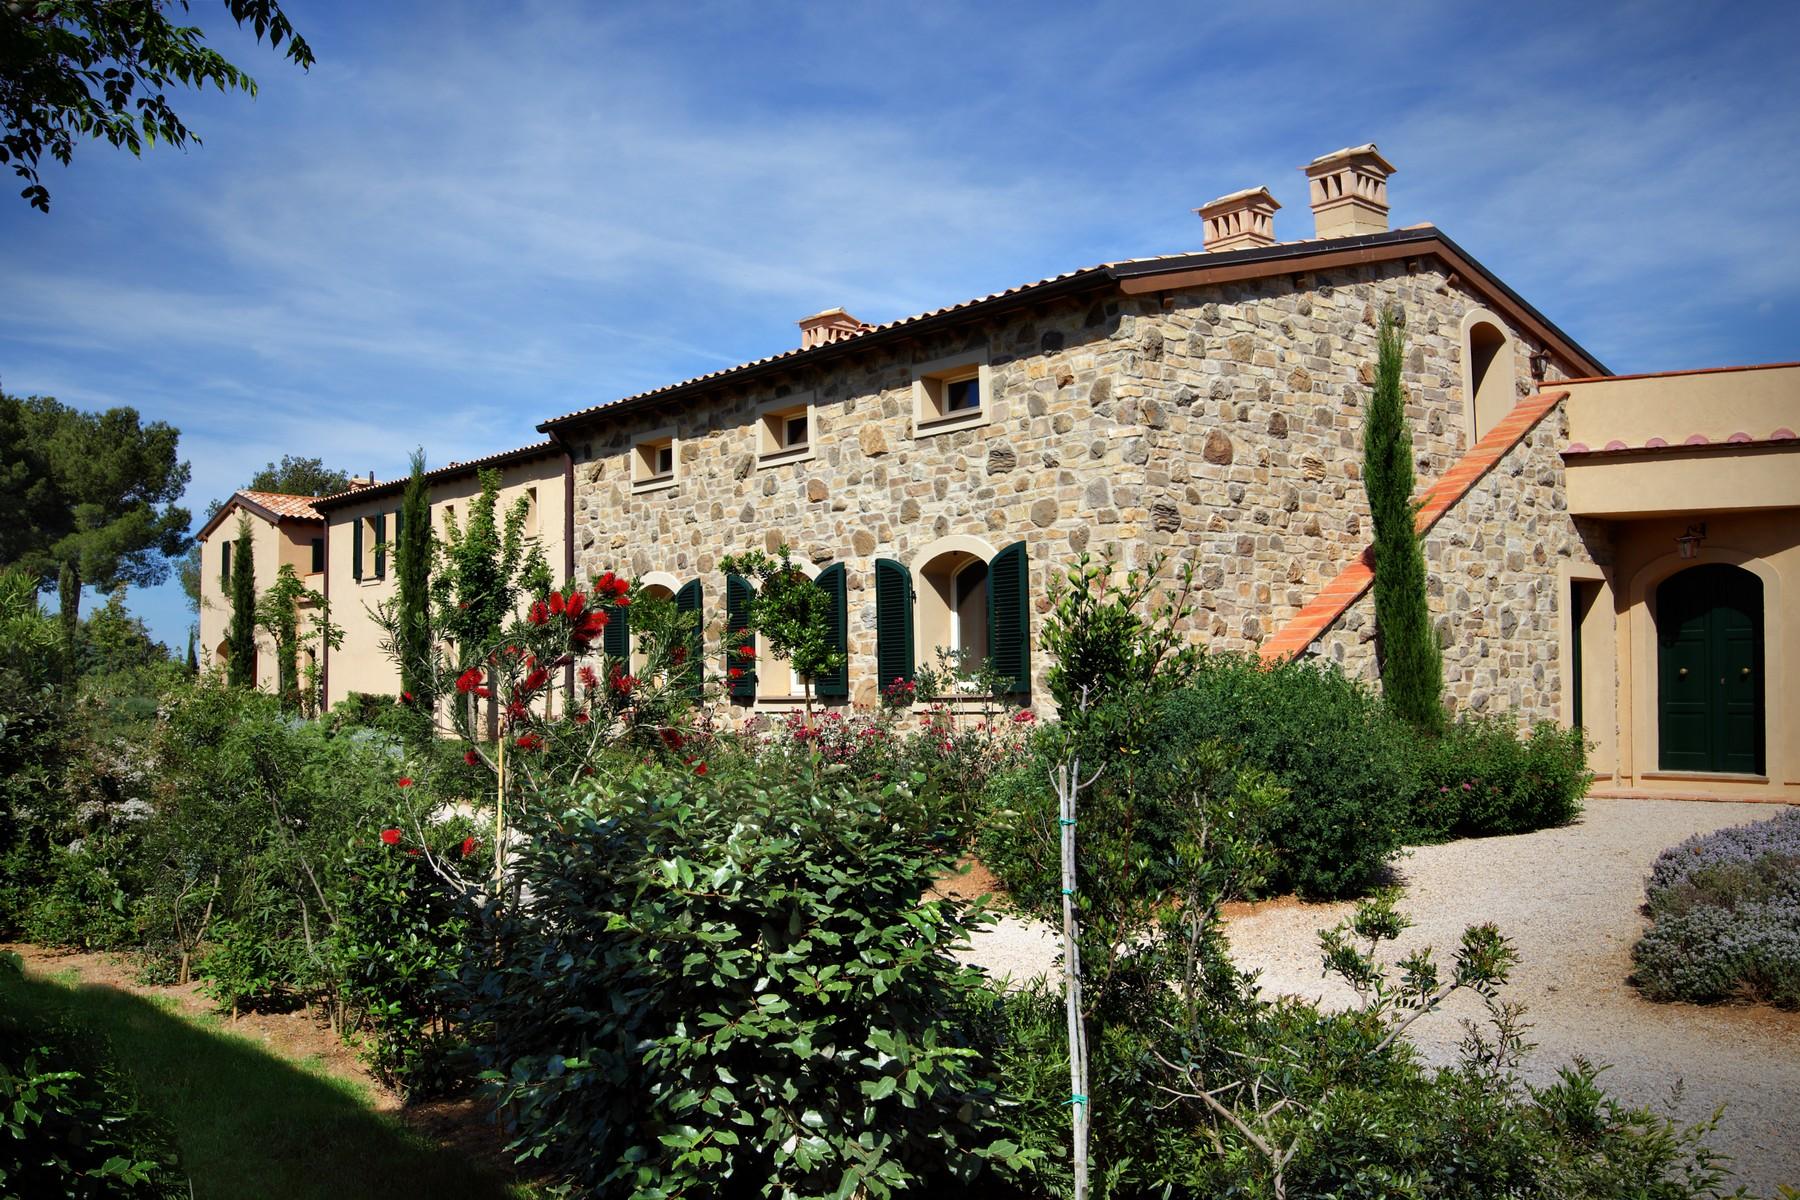 New farmhouses in the Tuscan hills - 3